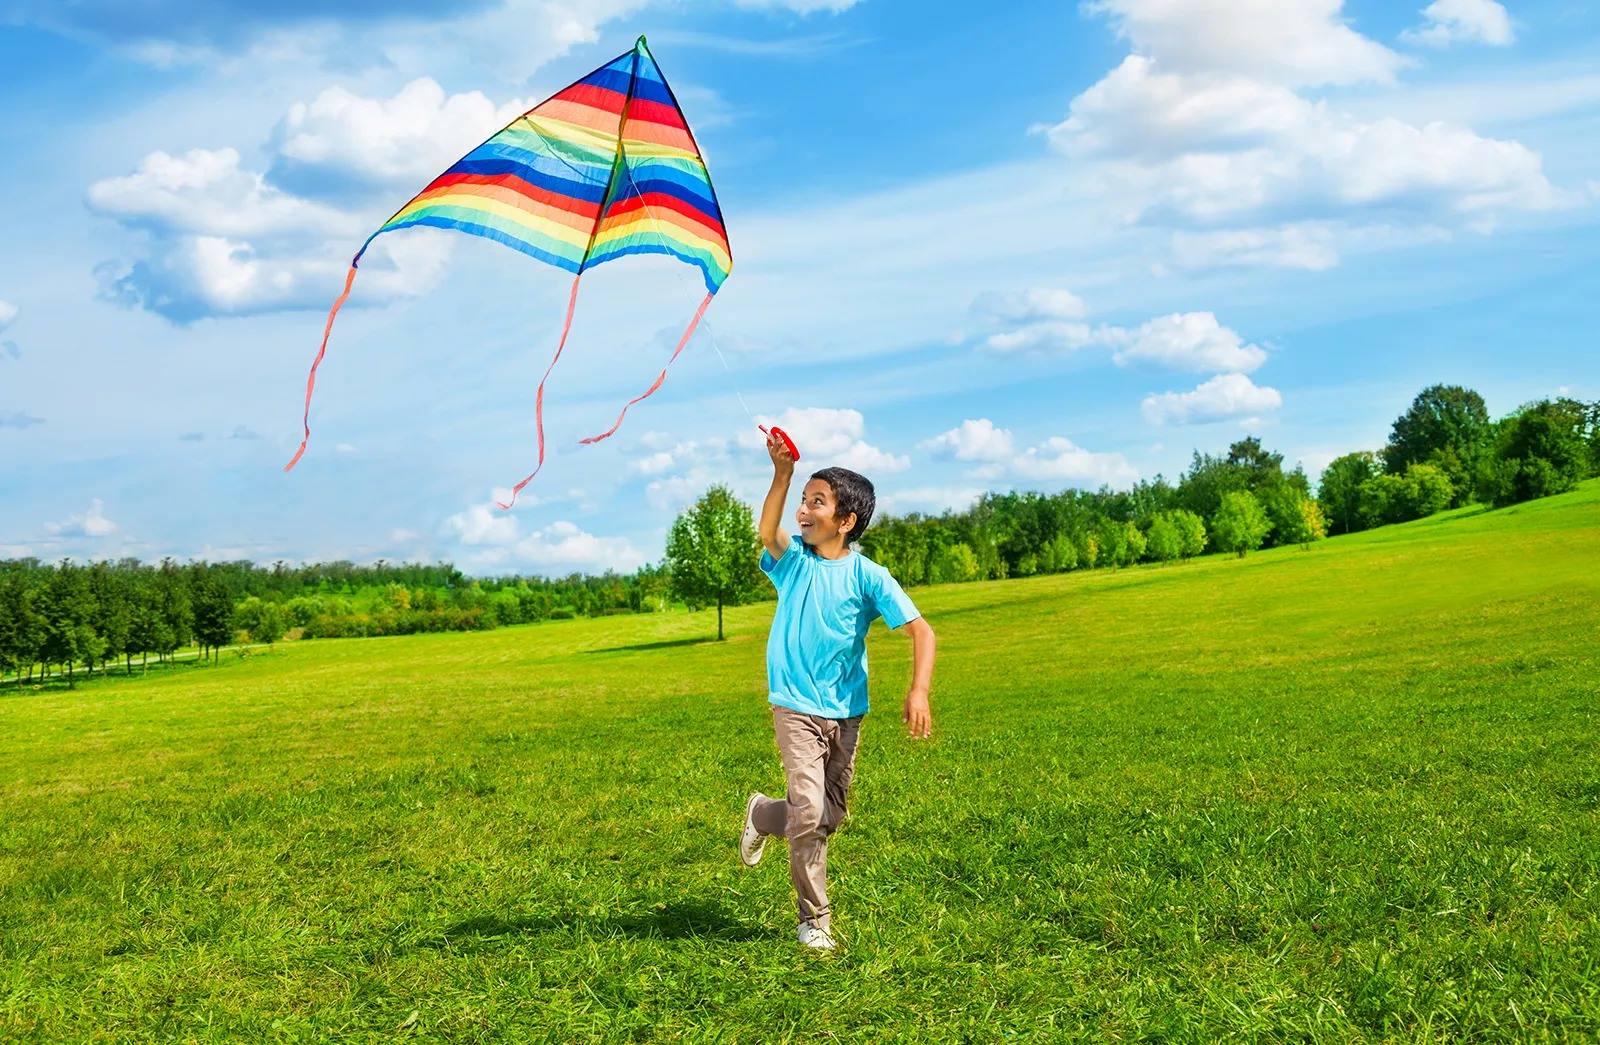 19 Mind Blowing Facts About Kite Flying